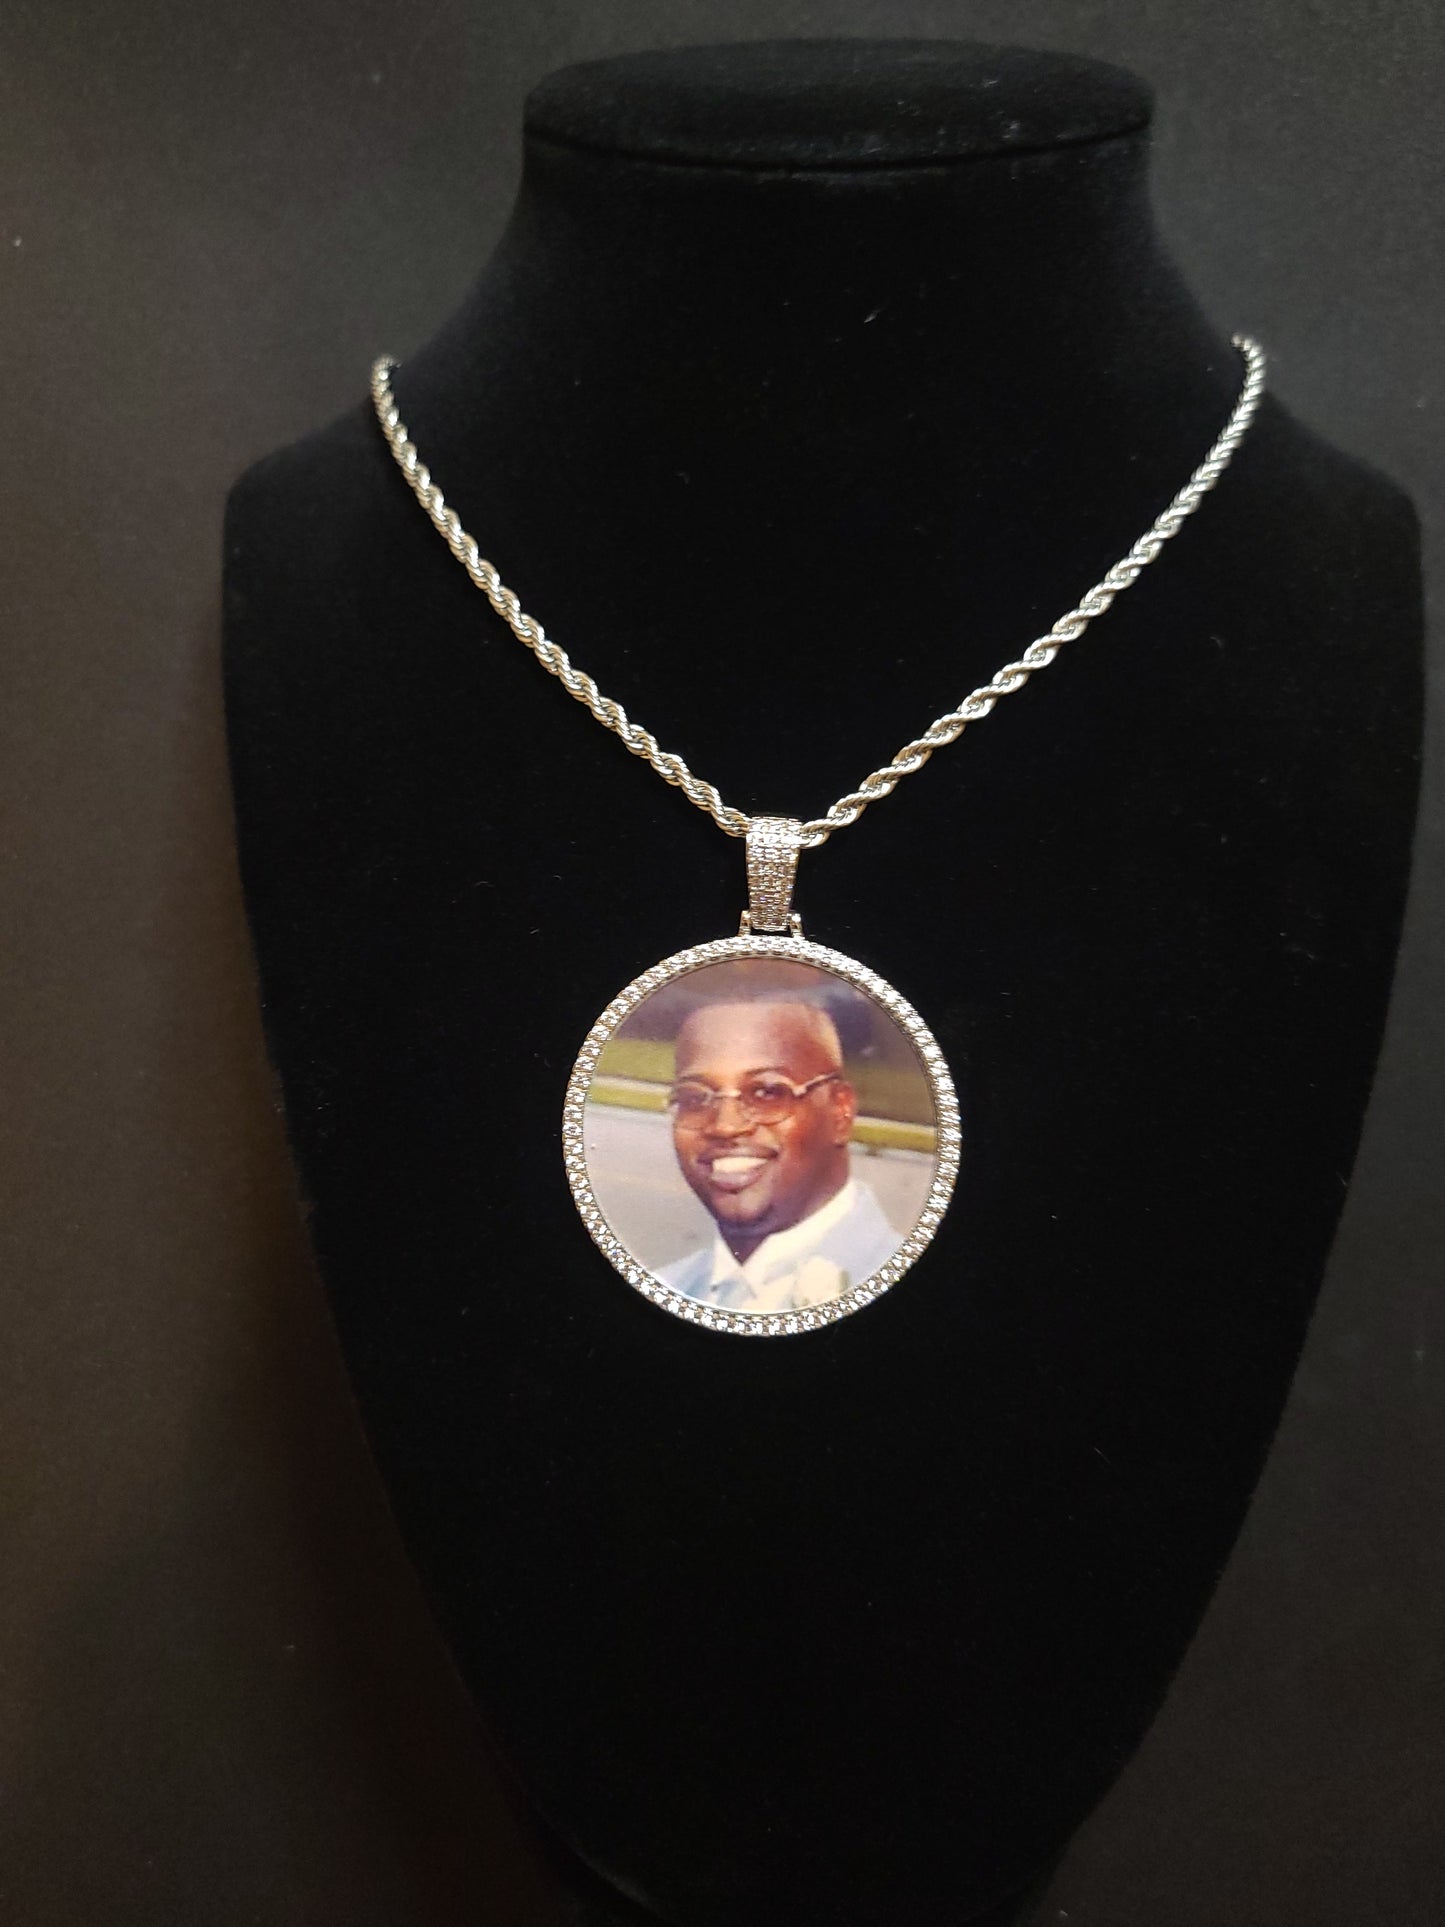 Large Custom Photo Picture Pendant Necklace - Blinged by Belle